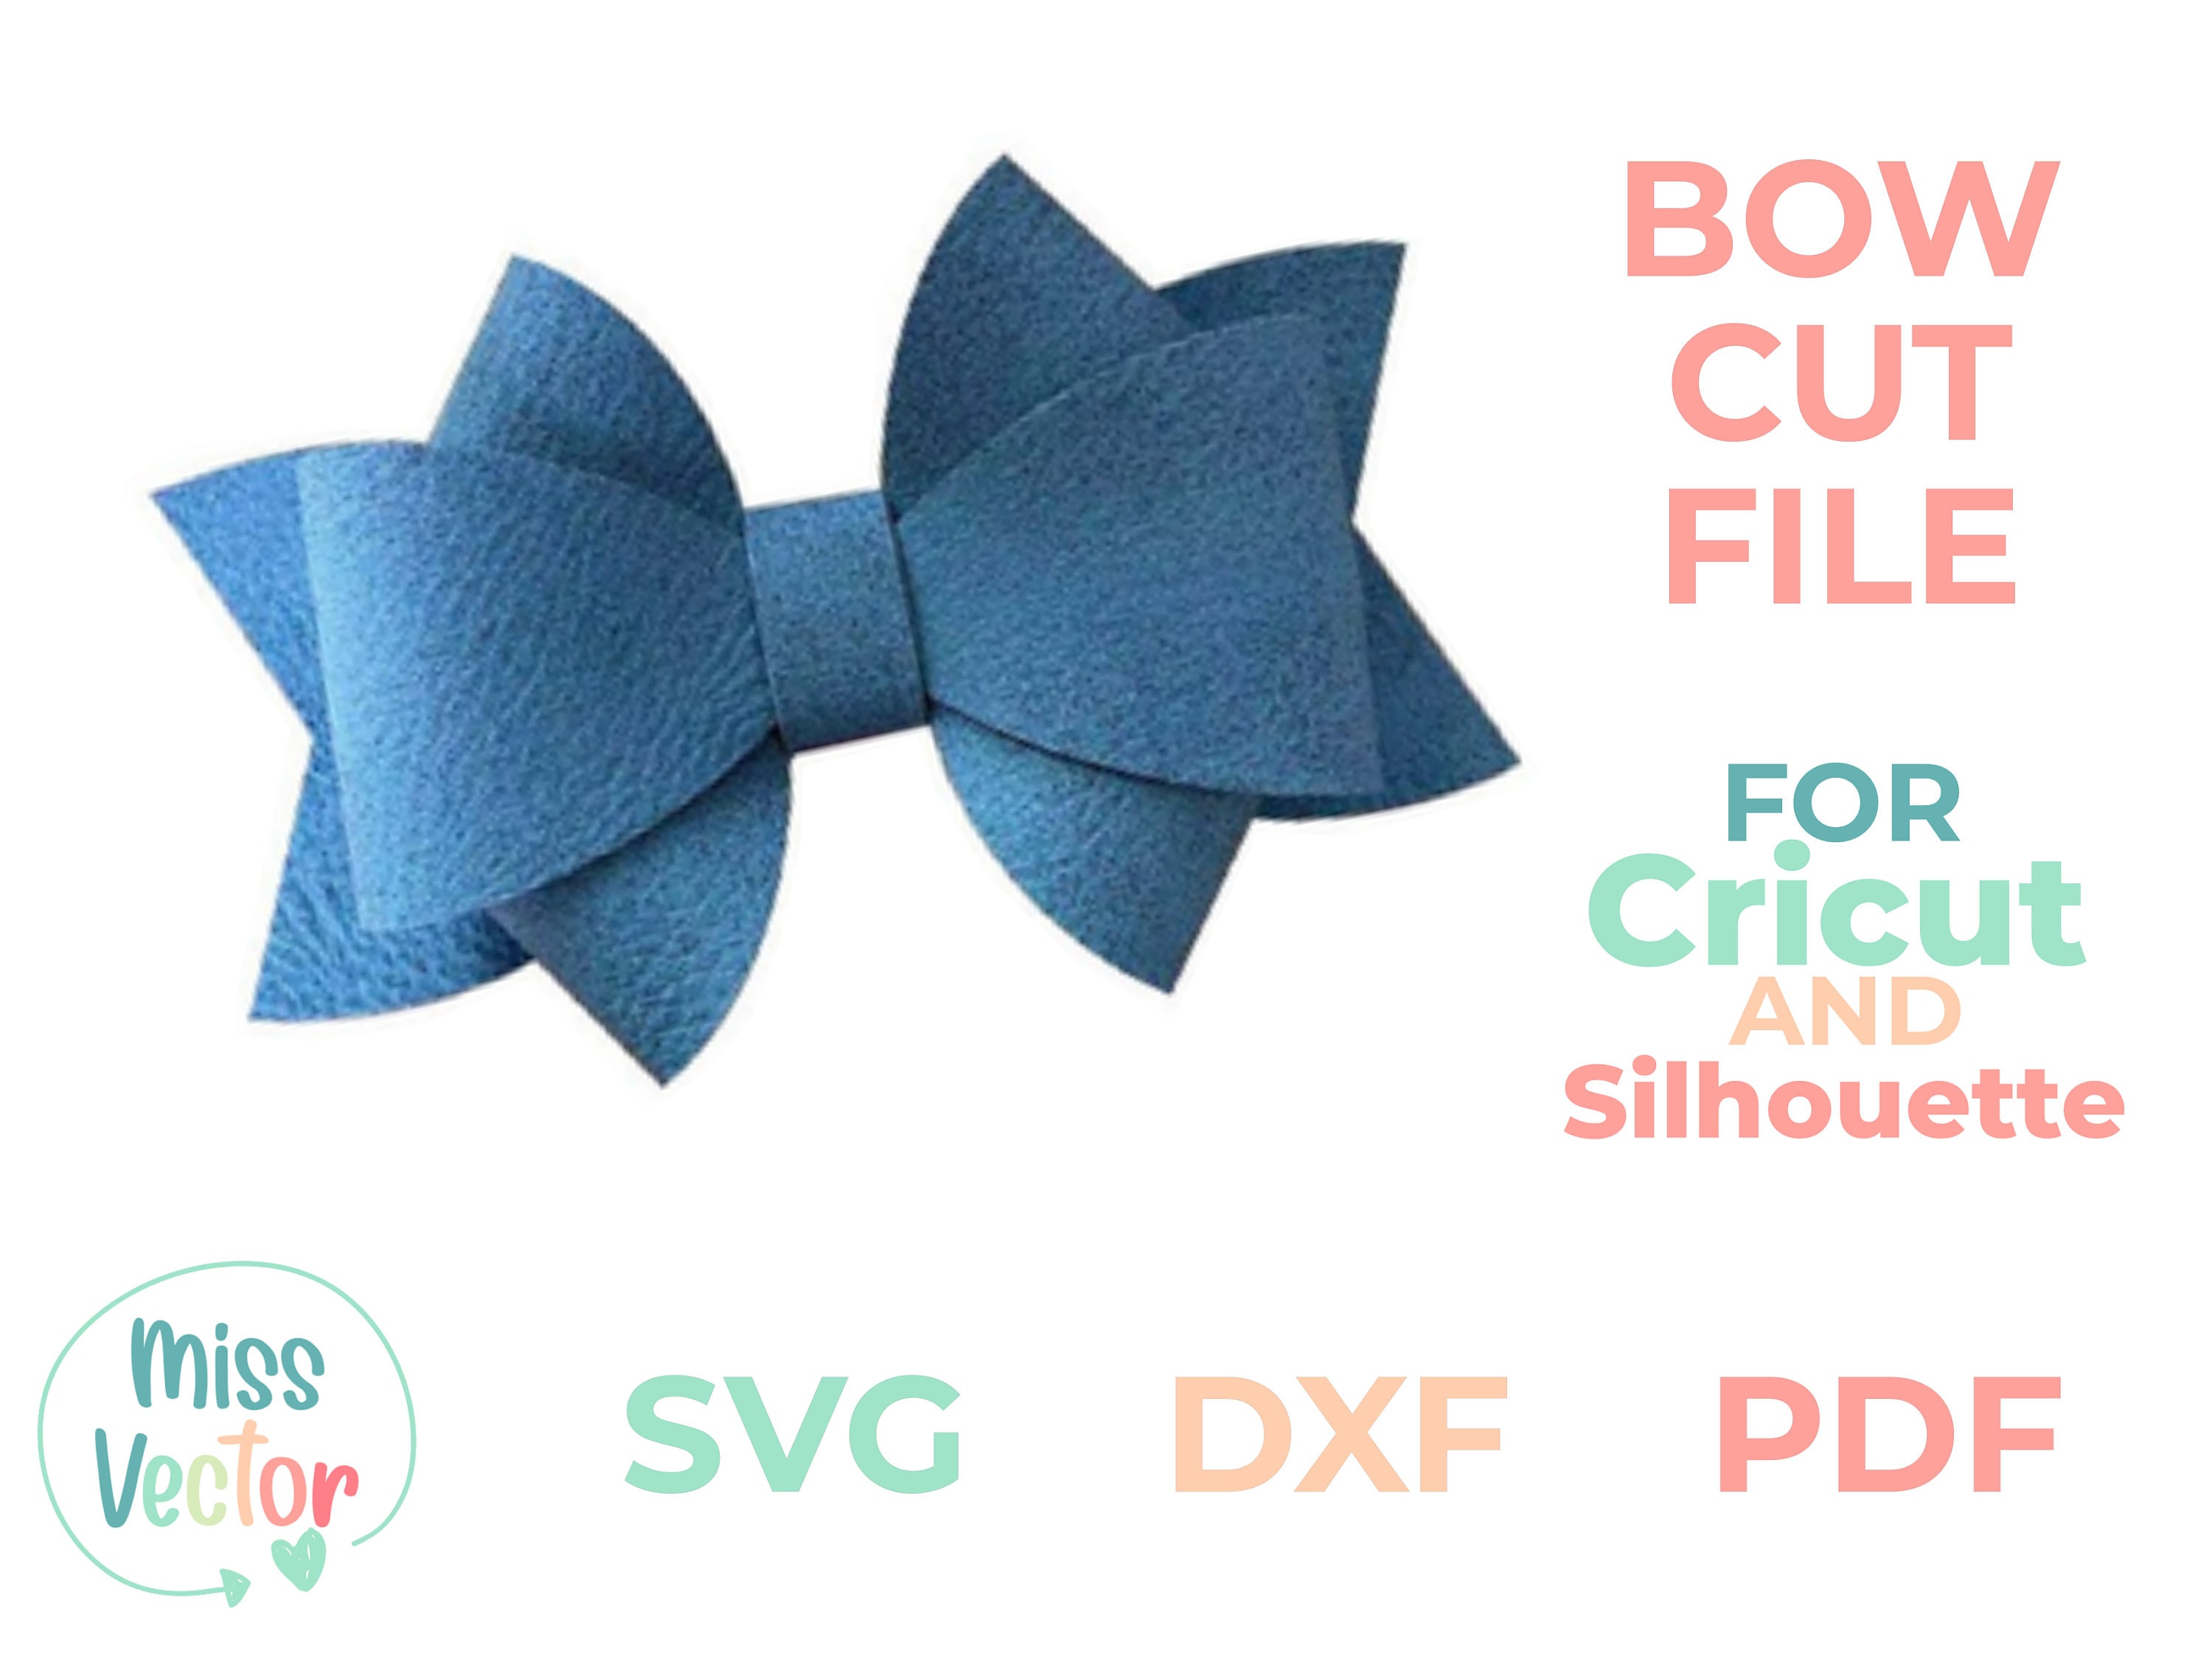 Bow Straw Topper SVG, Faux Leather Bow Topper, Tumbler Bow SVG, Cup –  Maisie Moo